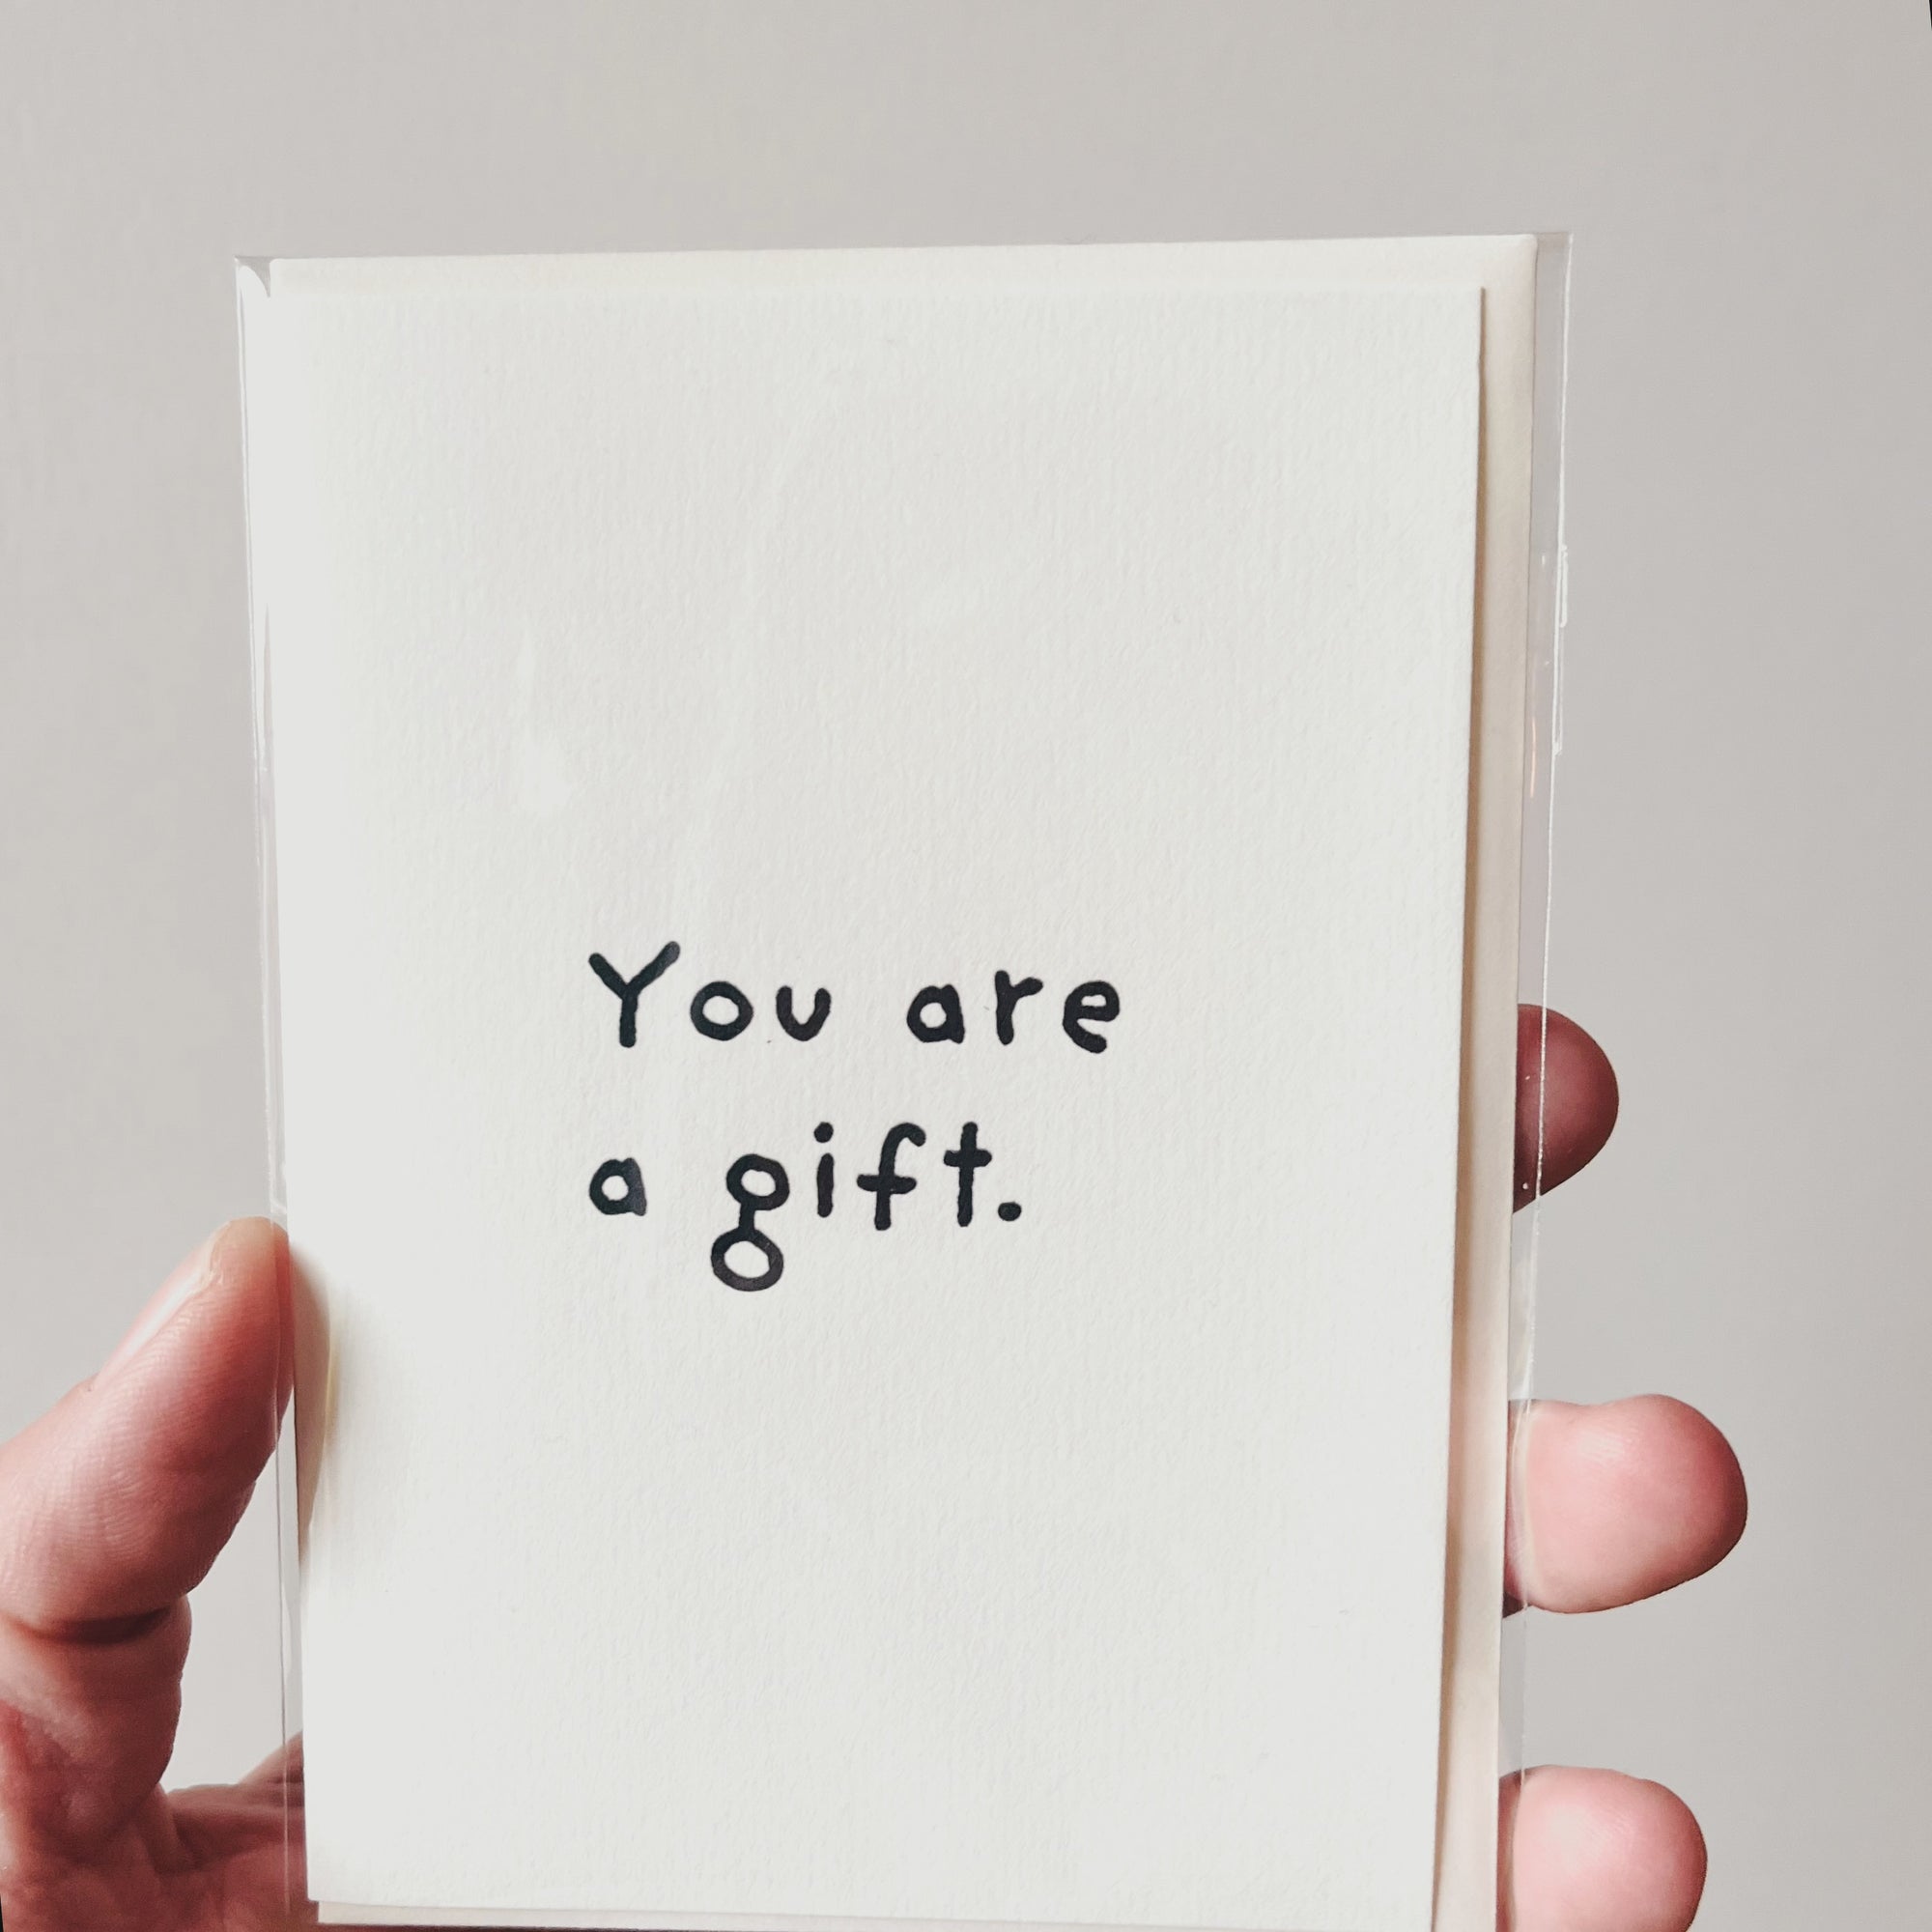 You are a gift.